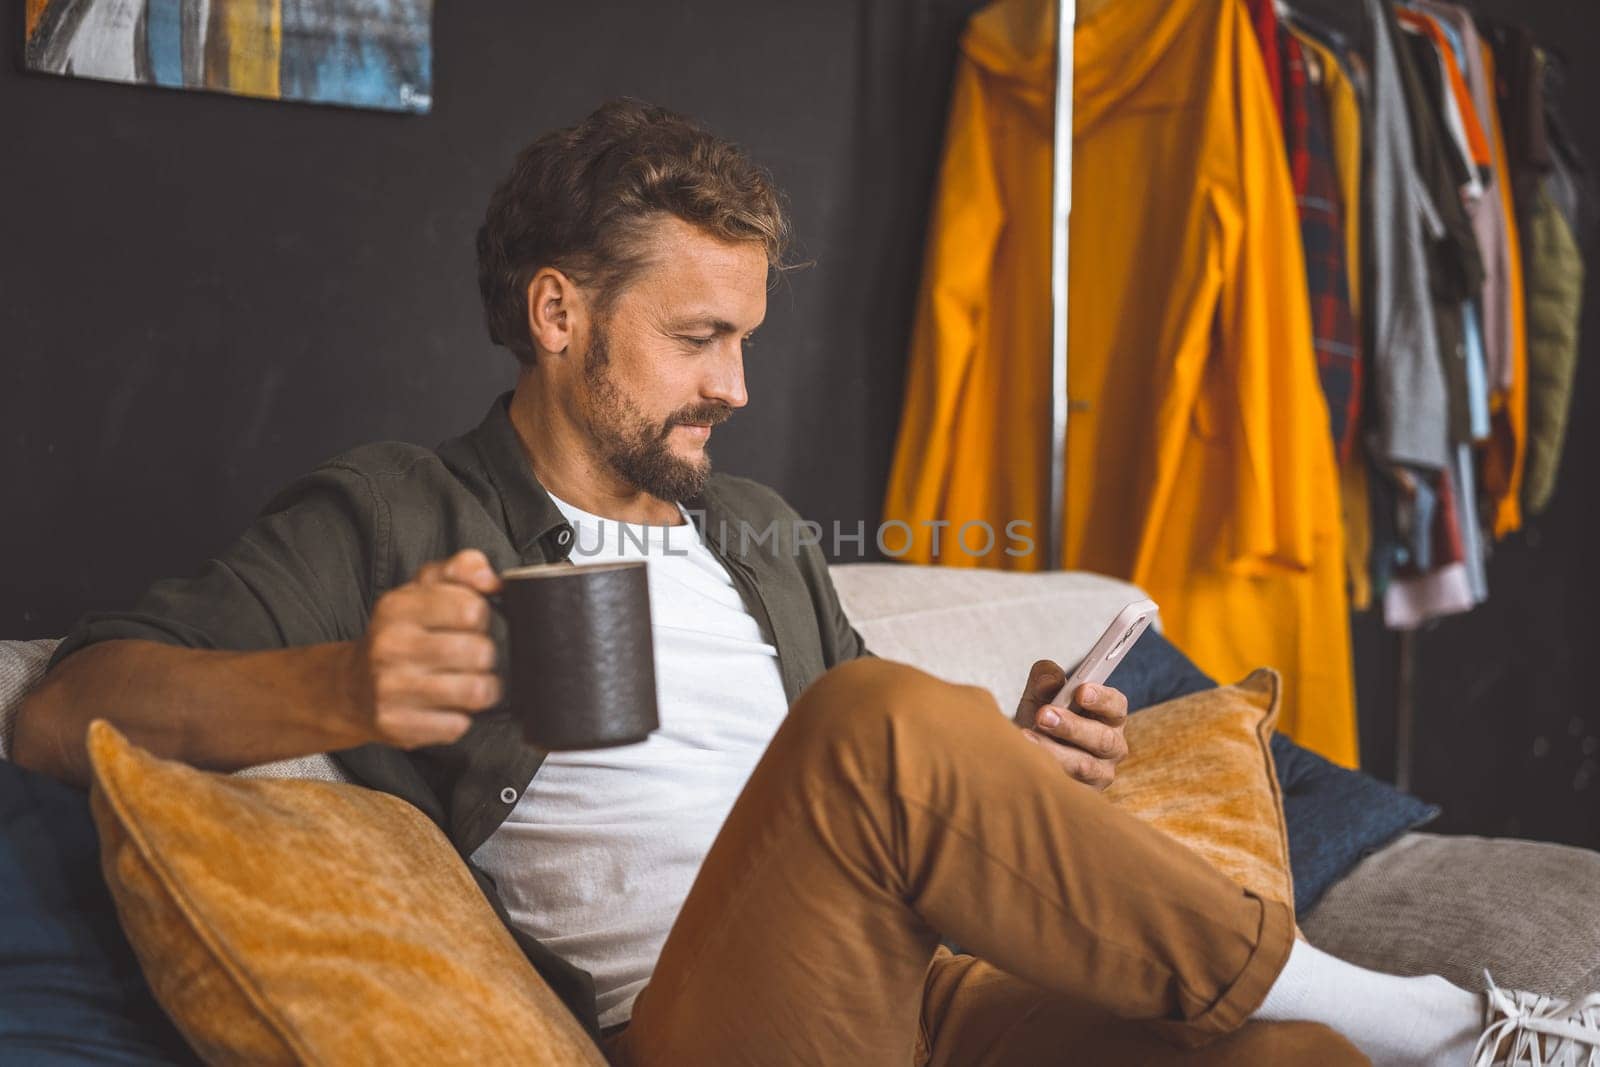 Man taking break at home, enjoying cup of coffee while focused on phone. Concept of spending time at home is emphasized, highlighting the importance of relaxation and leisure in our daily routines. by LipikStockMedia